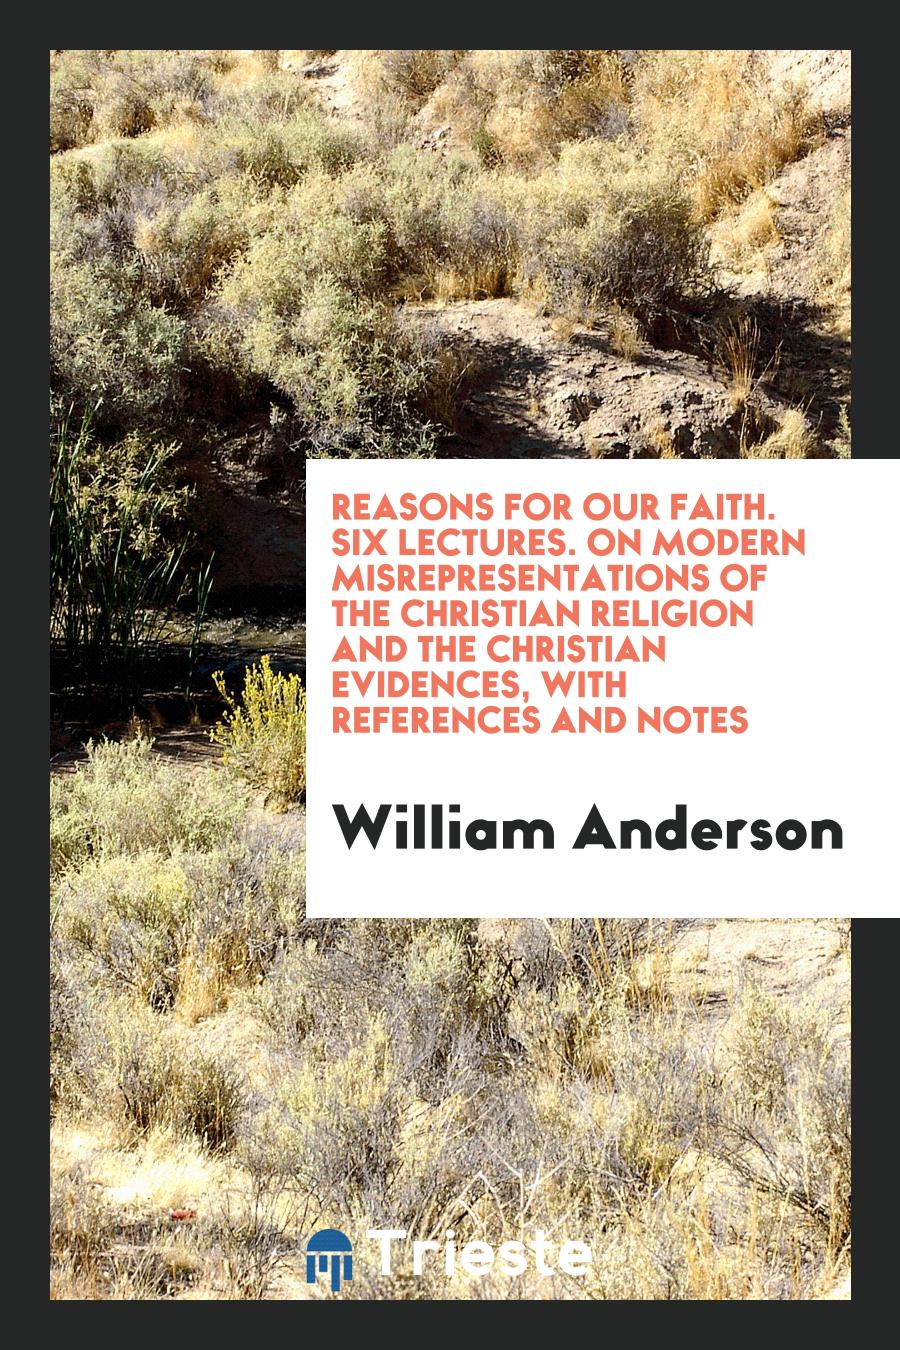 Reasons for Our Faith. Six Lectures. On Modern Misrepresentations of the Christian Religion and the Christian Evidences, with References and Notes